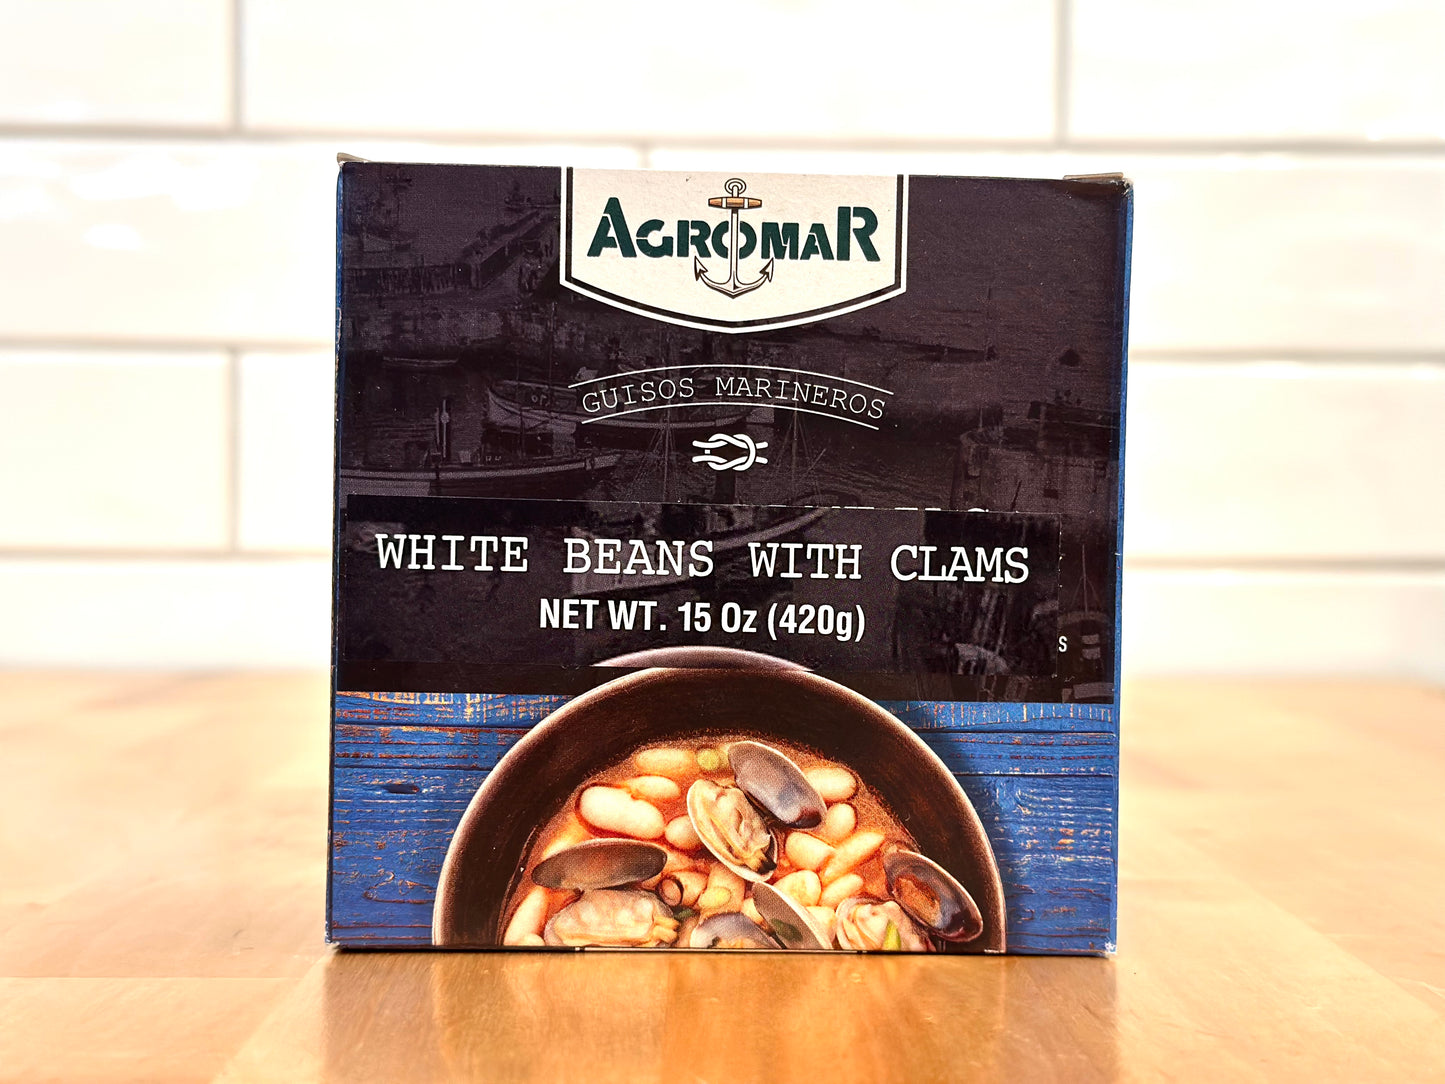 AGROMAR Fabes White Beans with Clams